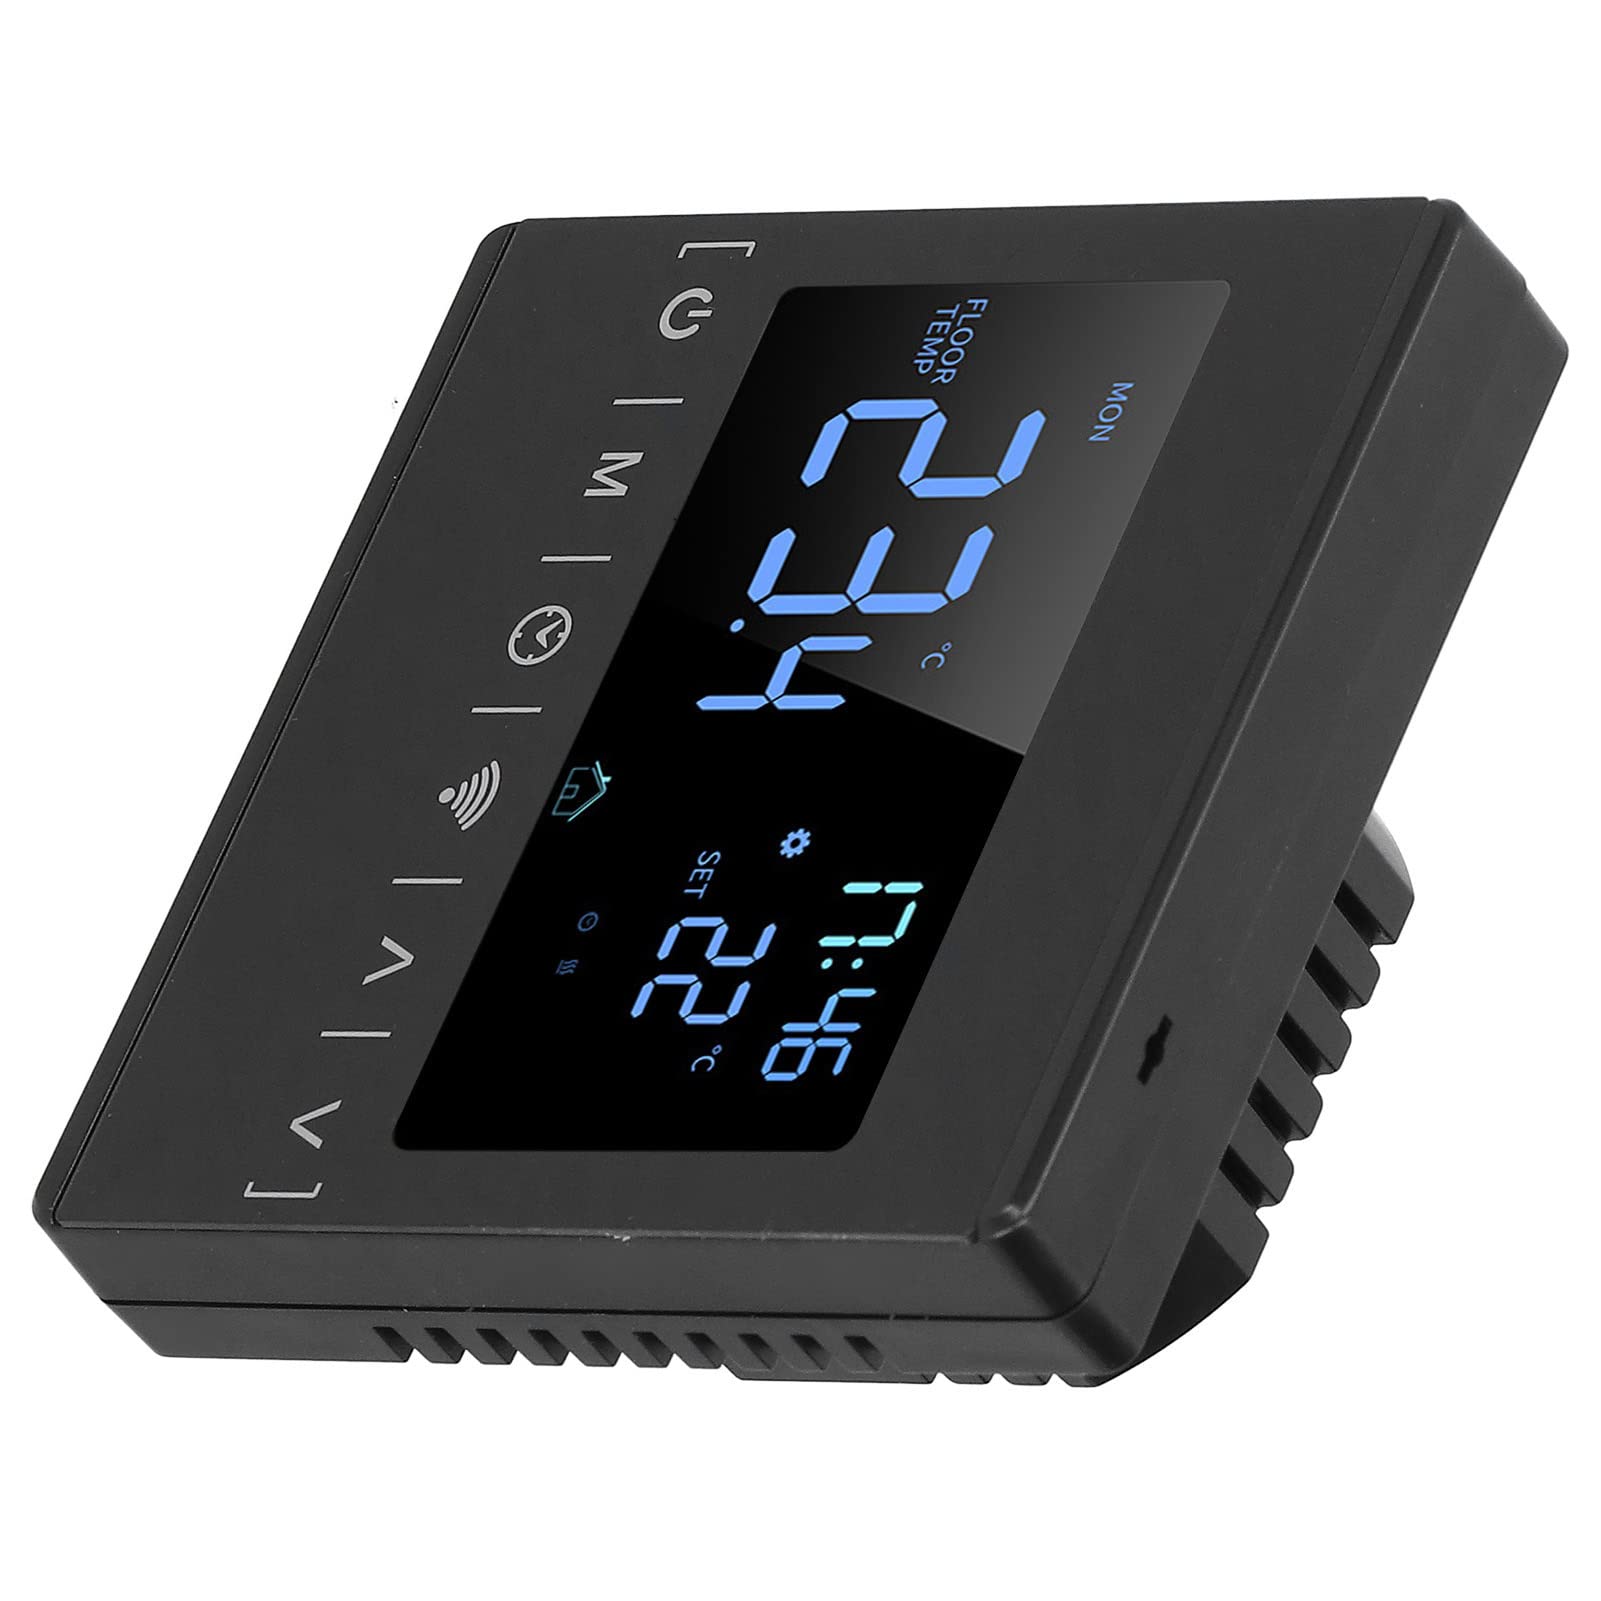 Touch Screen for Smart Thermostat WiFi Programmable Thermostat Floor Heating Controller Touch Screen WiFi Programmable Thermostat Industrial Supplies